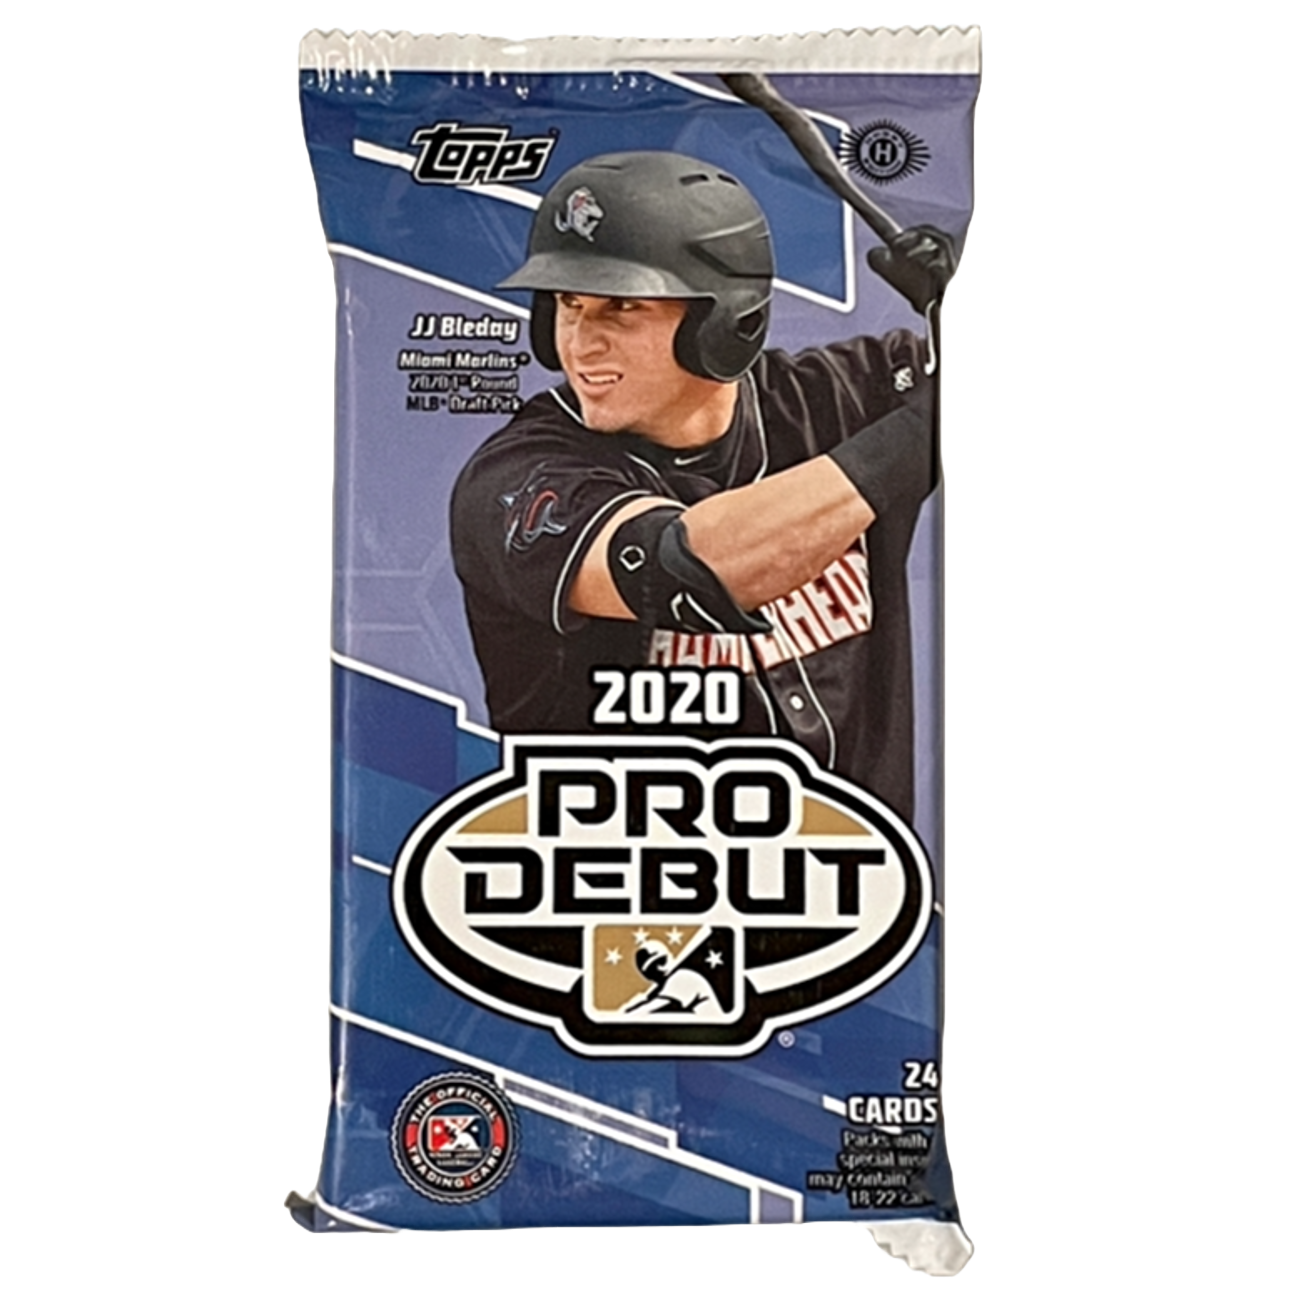 2020 Topps Pro Debut Baseball Jumbo Pack - 24 Cards - Collectibles